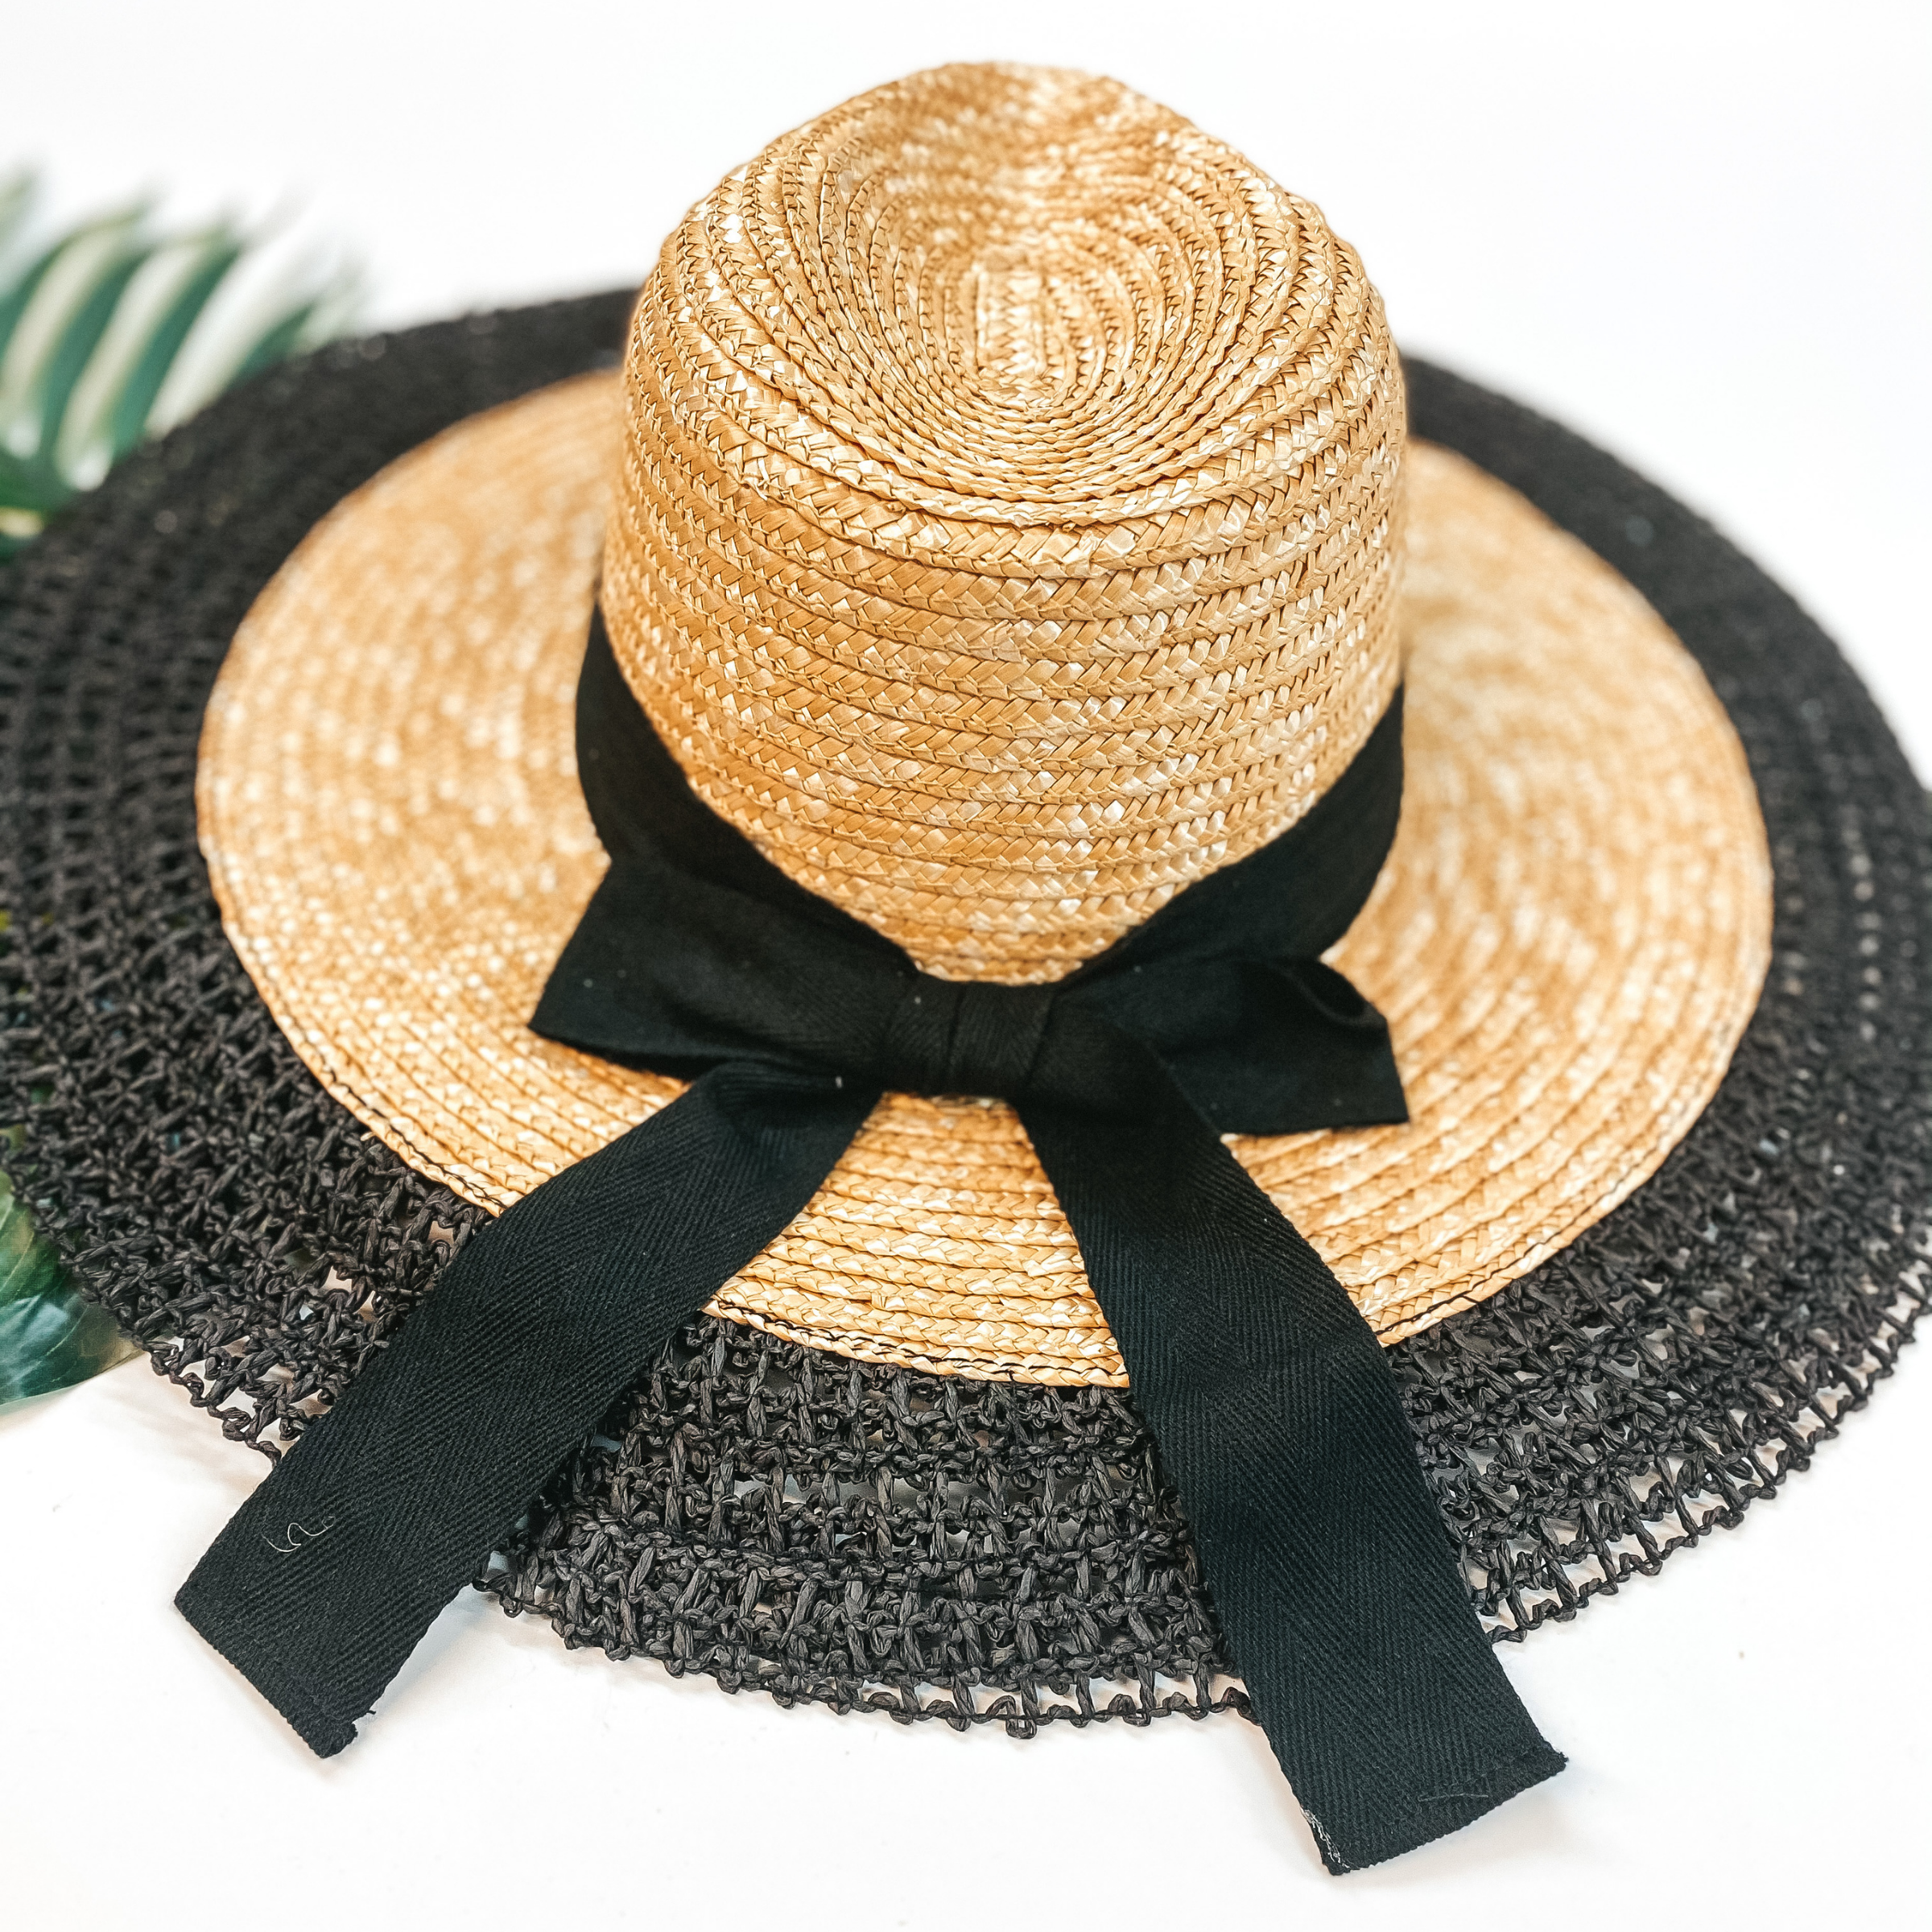 Sun Daze Wide Brim Hat with Black Band and Bow in Natural Tan and Black - Giddy Up Glamour Boutique